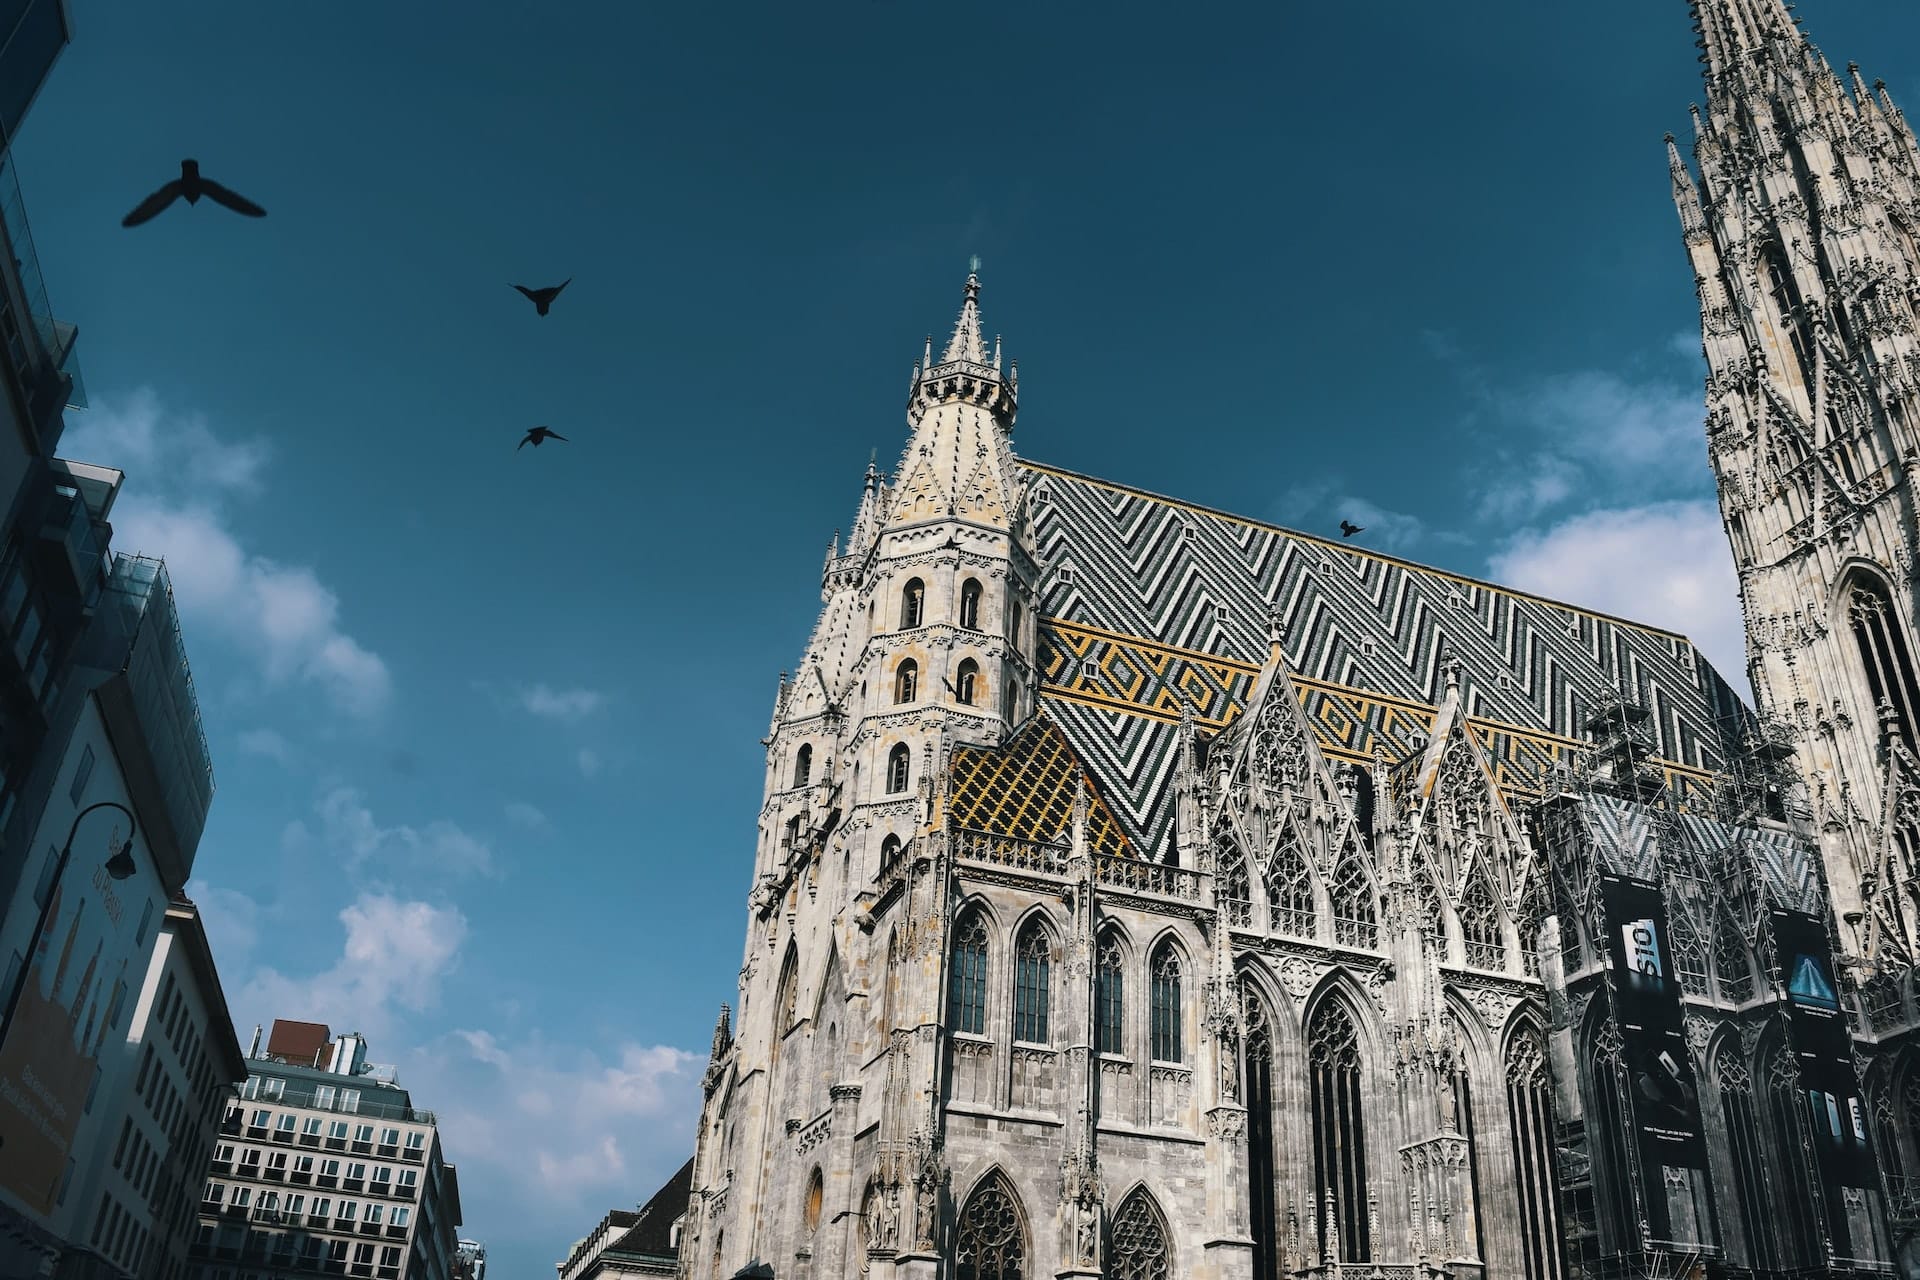 Located in Vienna's heart and packed with attractions, the Innere Stadt is the Austrian capital's historic, political and commercial epicenter